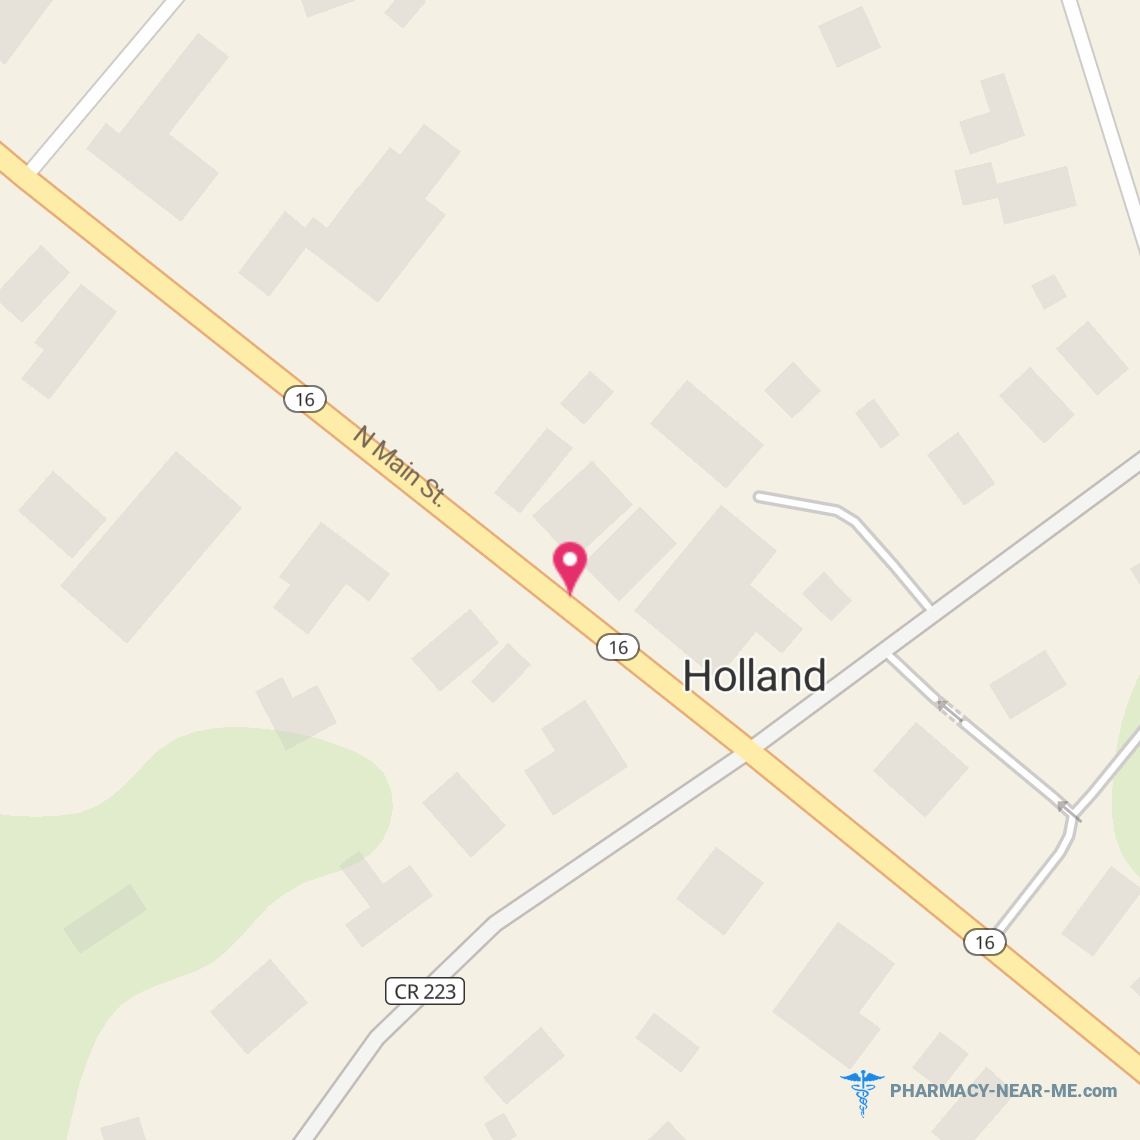 ROUTE 16 PHARMACY, LLC - Pharmacy Hours, Phone, Reviews & Information: 19 North Main Street, Holland, New York 14080, United States